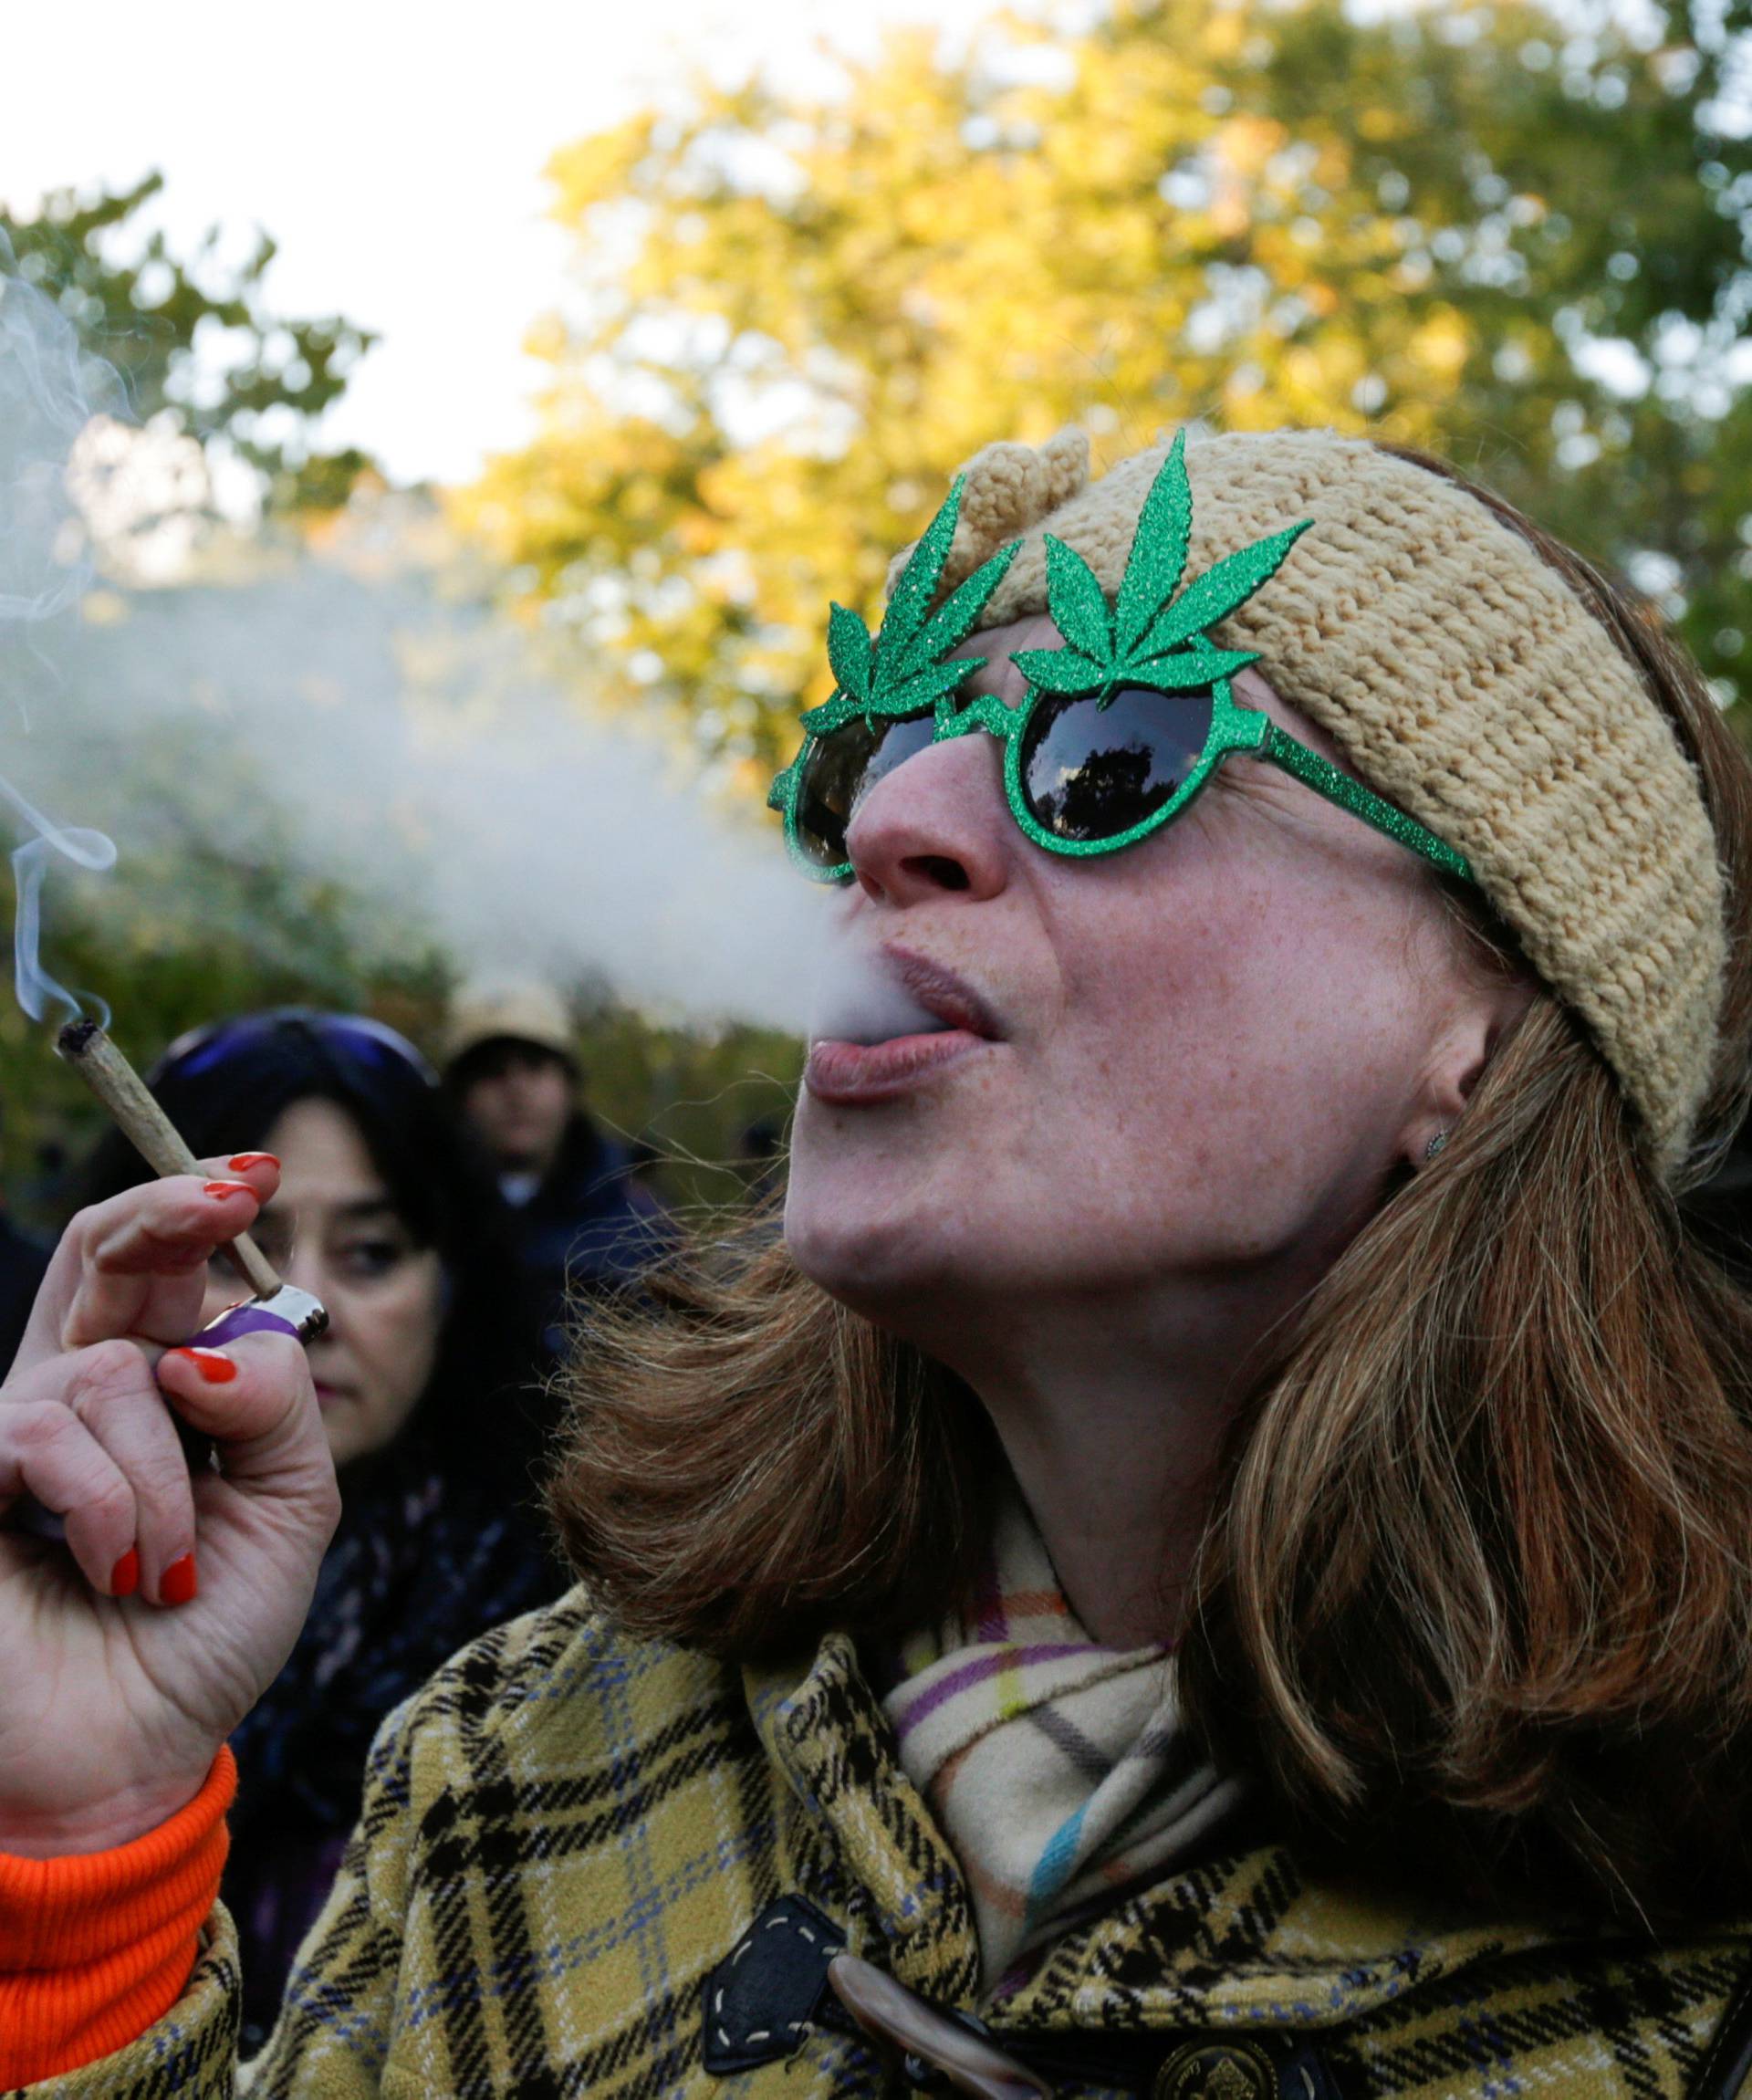 A woman smokes a joint on the day Canada legalizes recreational marijuana at Trinity Bellwoods Park in Toronto